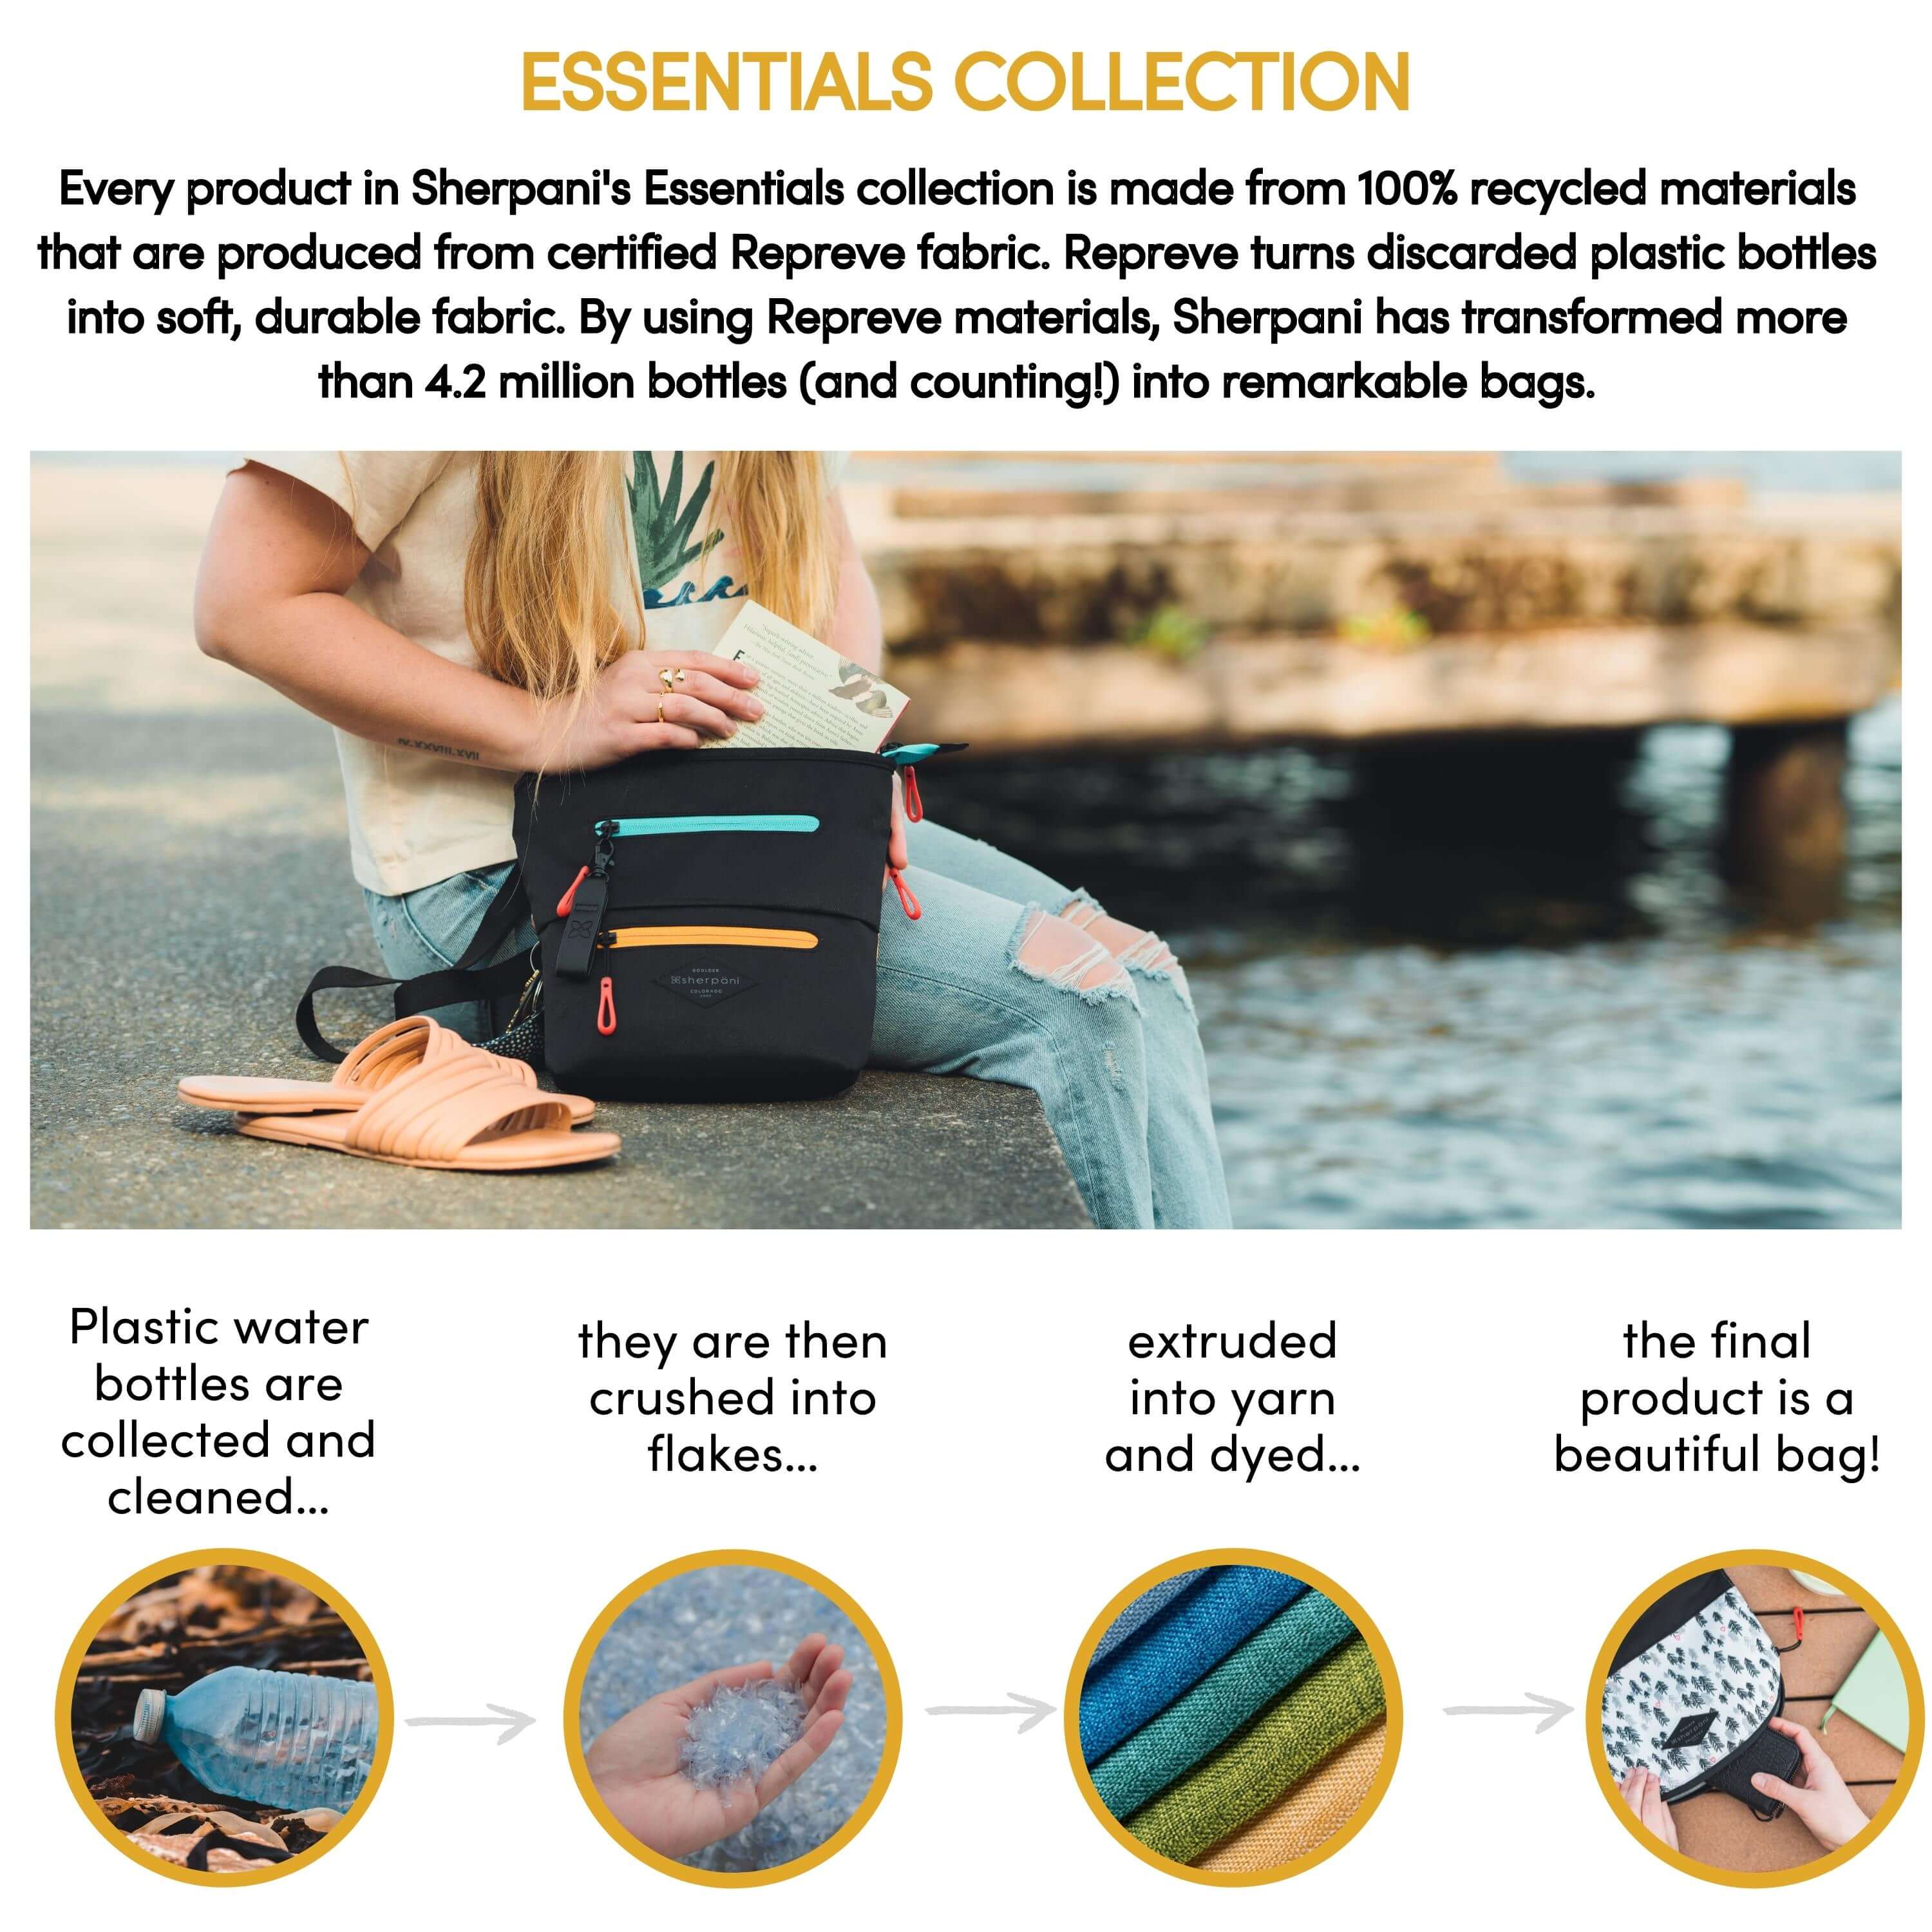 “Essentials Collection: Every product in Sherpani’s Essentials collection is made from 1% recycled materials that are produced and certified Repreve fabric. Repreve turns discarded plastic bottles into soft, durable fabric. By using Repreve materials, Sherpani has transformed more than 4.2 million bottles (and counting!) into remarkable bags. Plastic water bottles are collected and cleaned…they are then crushed into flakes…extruded into yarn and dyed…the final product is a beautiful bag!” 